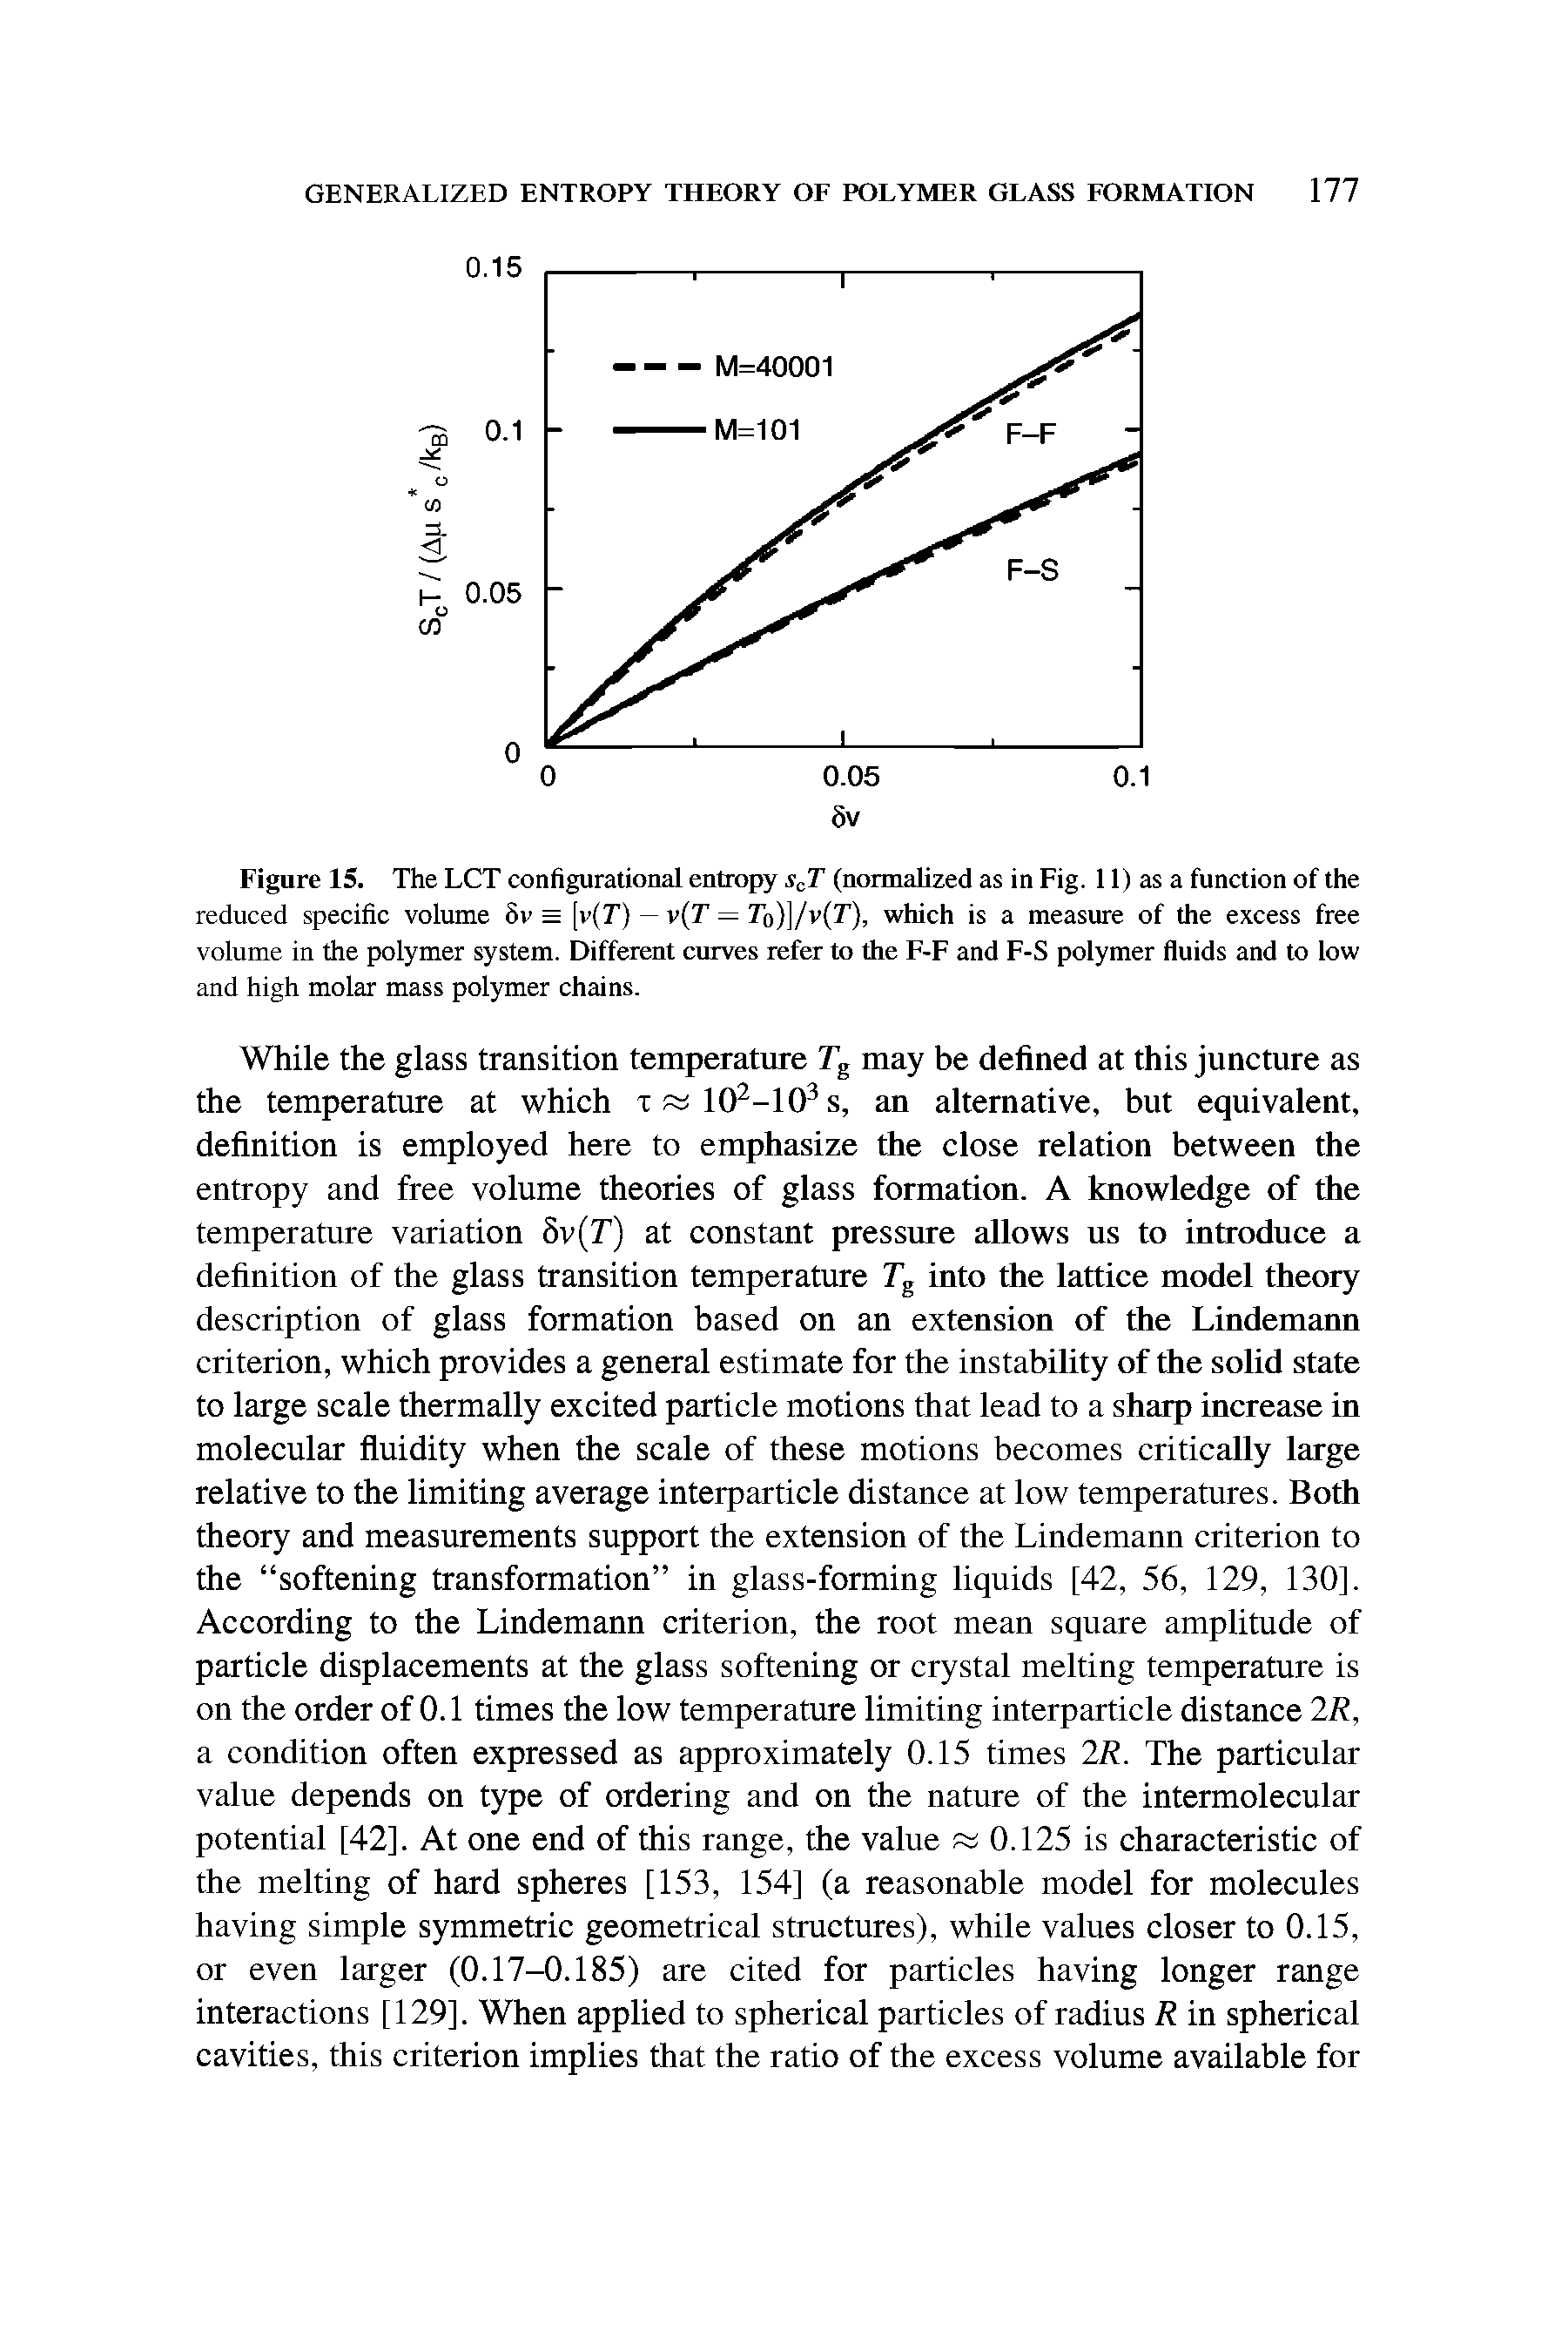 Figure 15. The LCT configurational entropy s T (normalized as in Fig. 11) as a function of the reduced specific volume 8v = [v T) — v(T = To)]/v(T), which is a measure of the excess free volume in the polymer system. Different curves refer to the F-F and F-S polymer fluids and to low and high molar mass polymer chains.